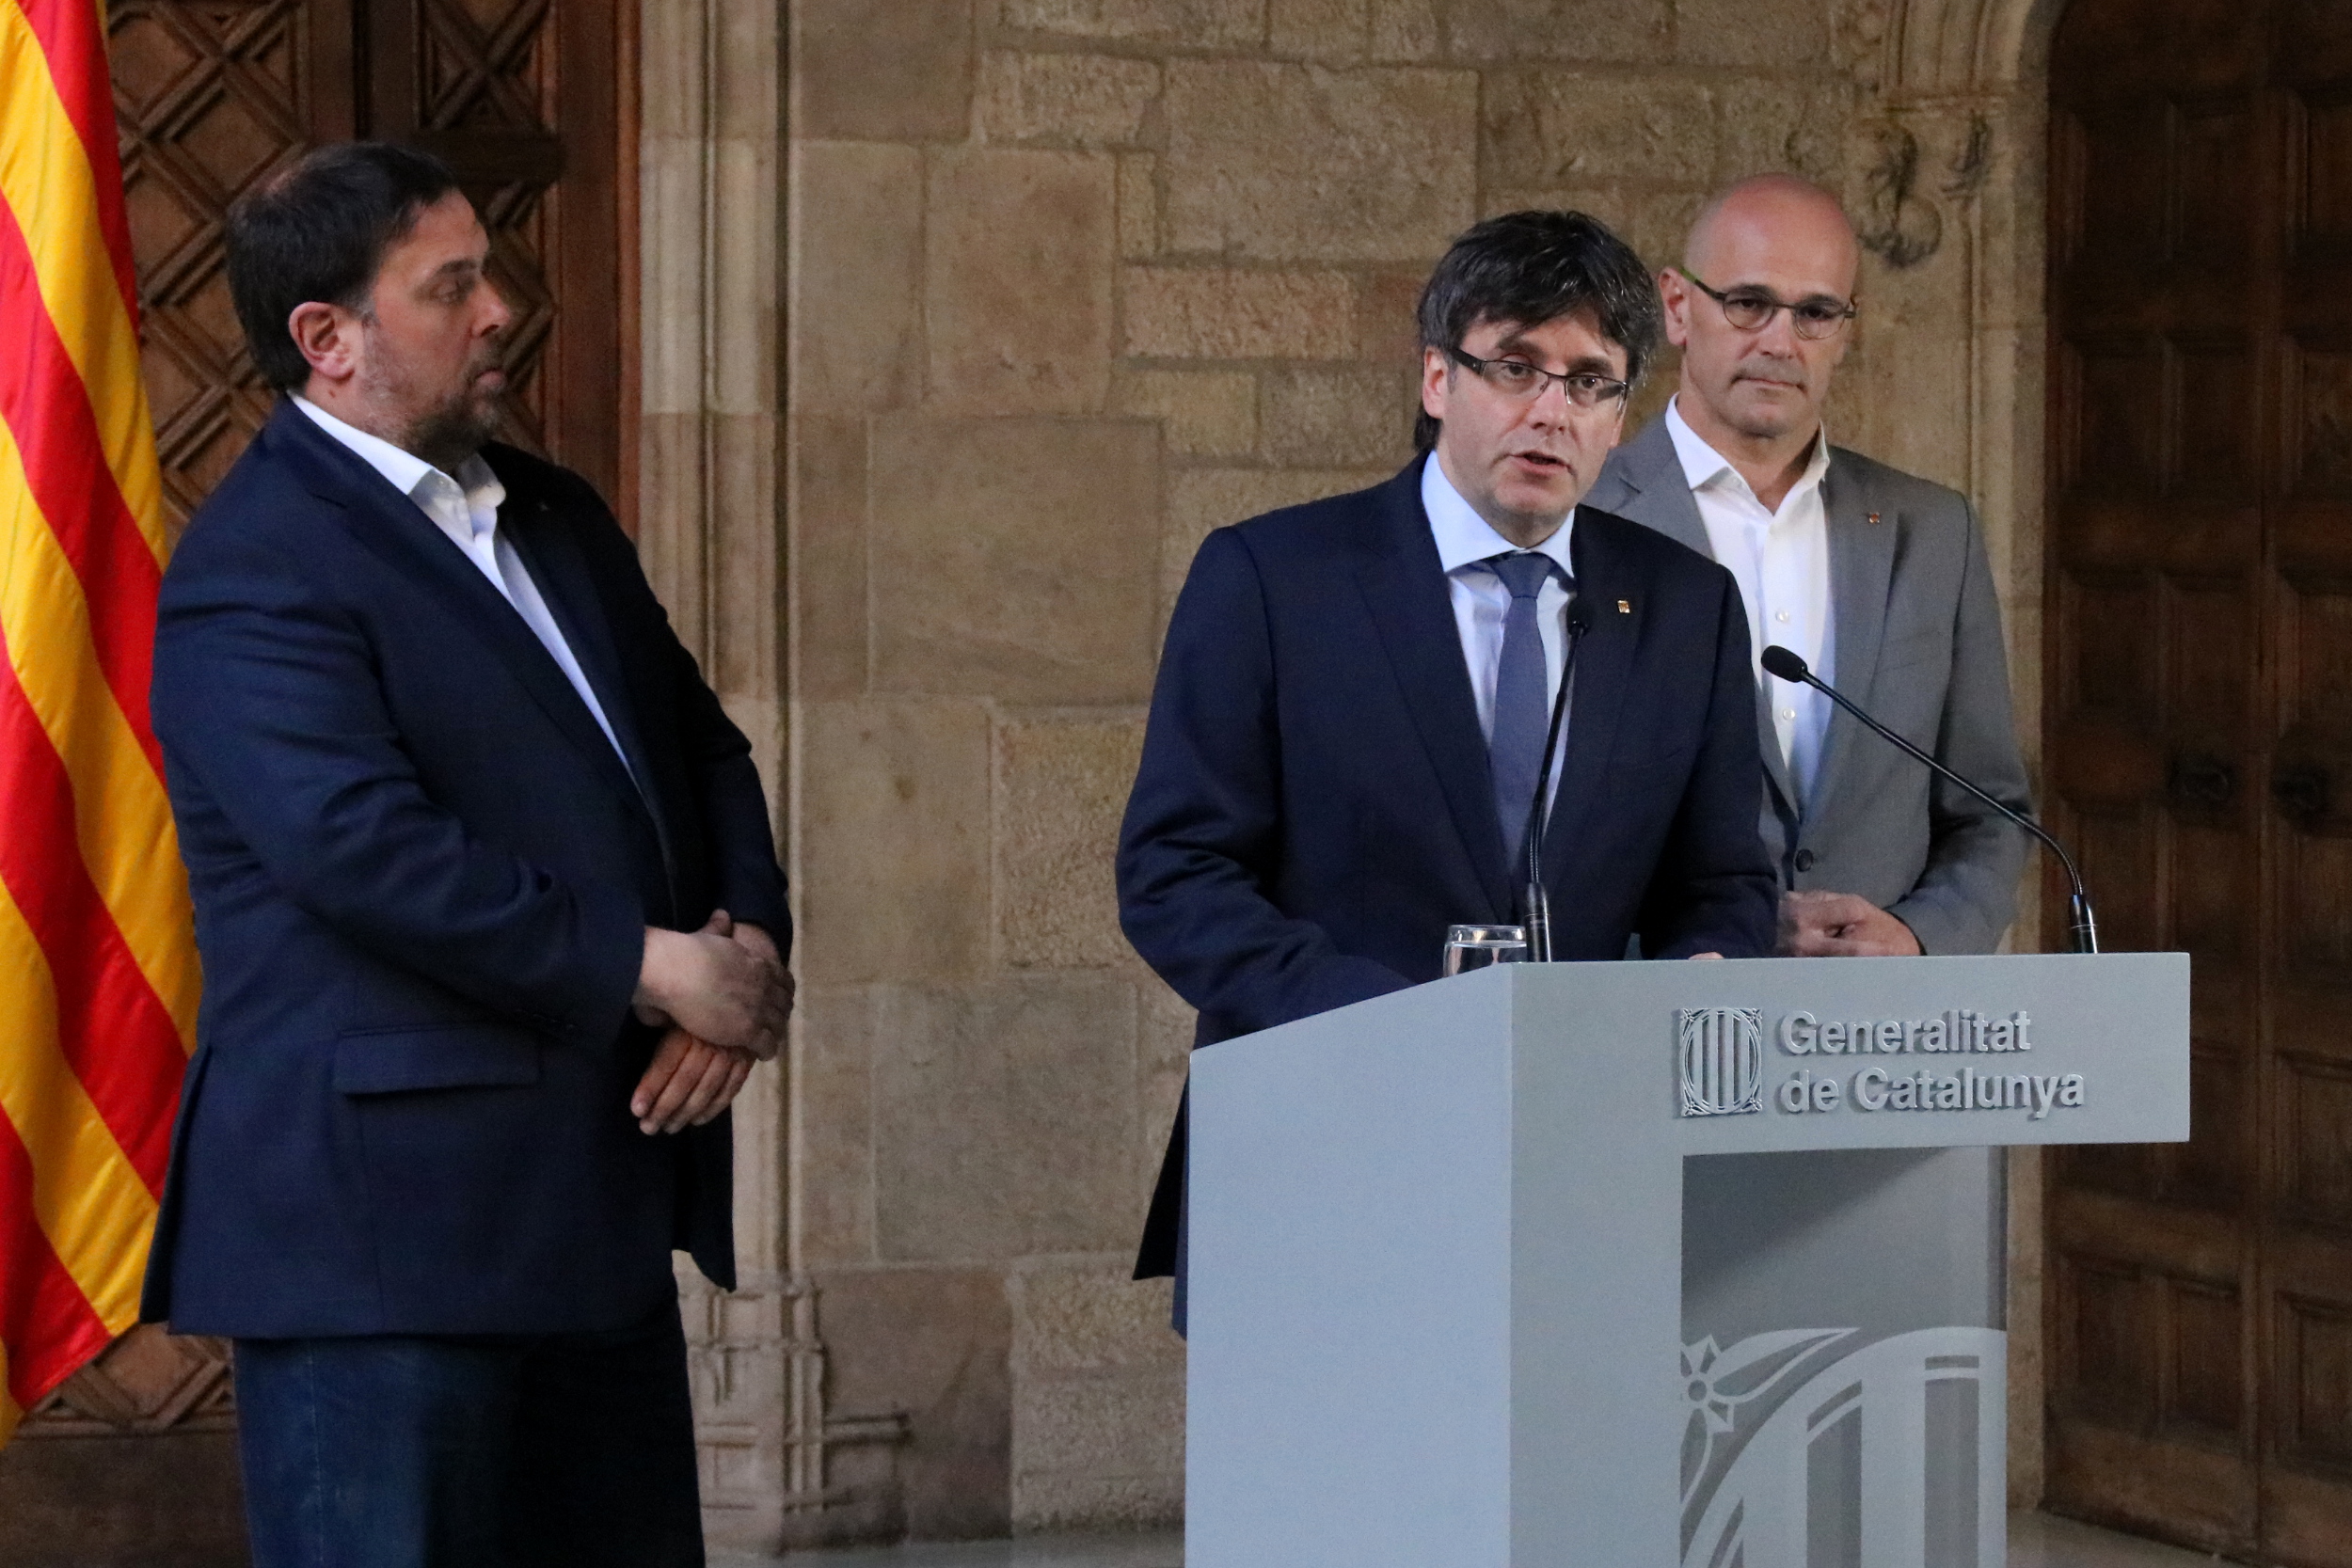 Catalan President, Carles Puigdemont, joined by Catalan Vice President, Oriol Junqueras and the Catalan Minister for Foreign Affairs, Raül Romeva (by ACN)